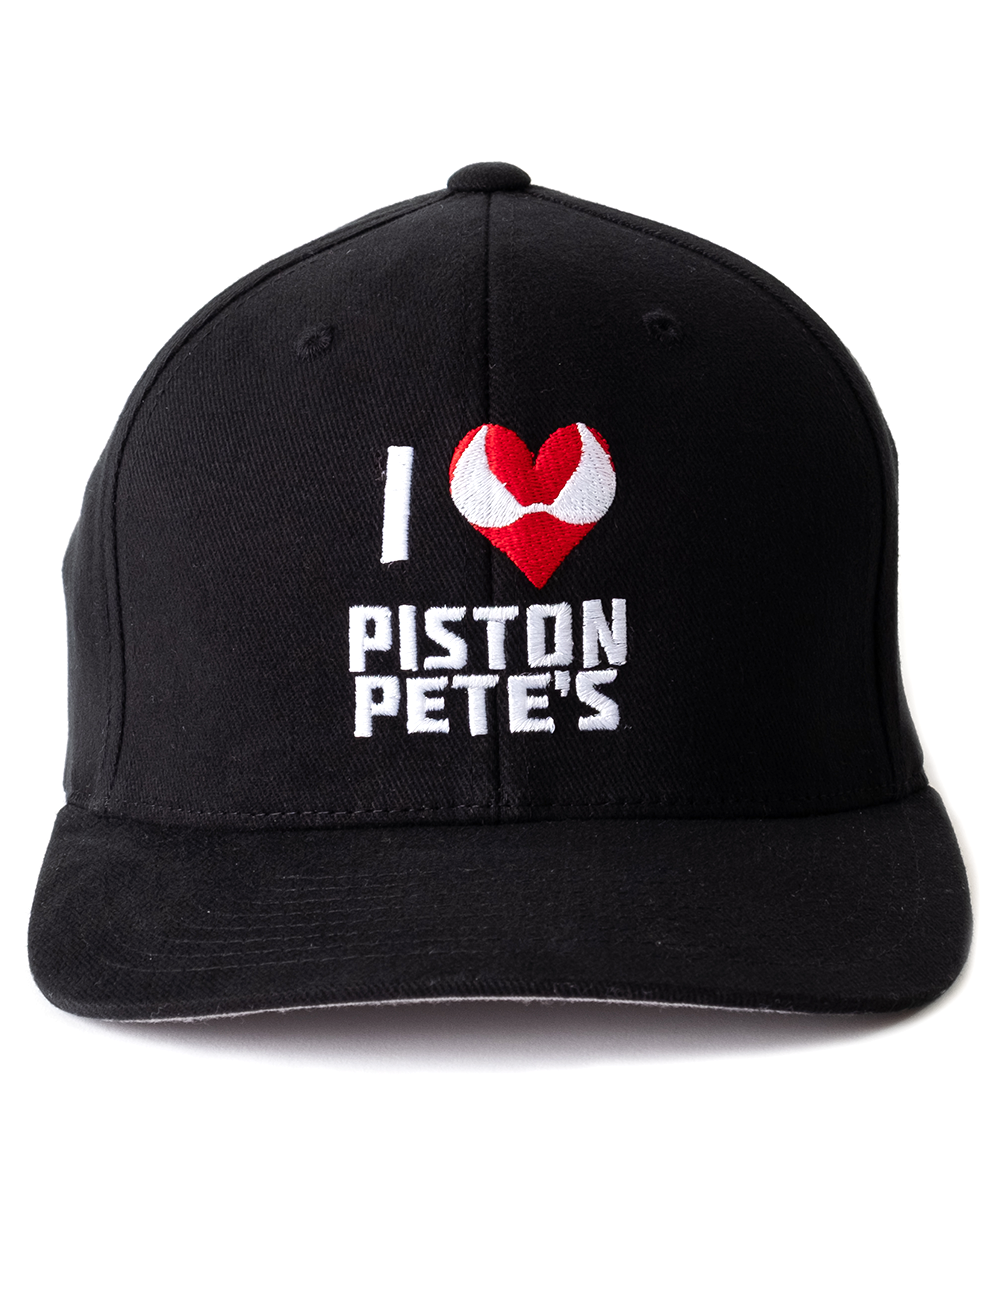 Art and Ink Piston Petes Branded hats